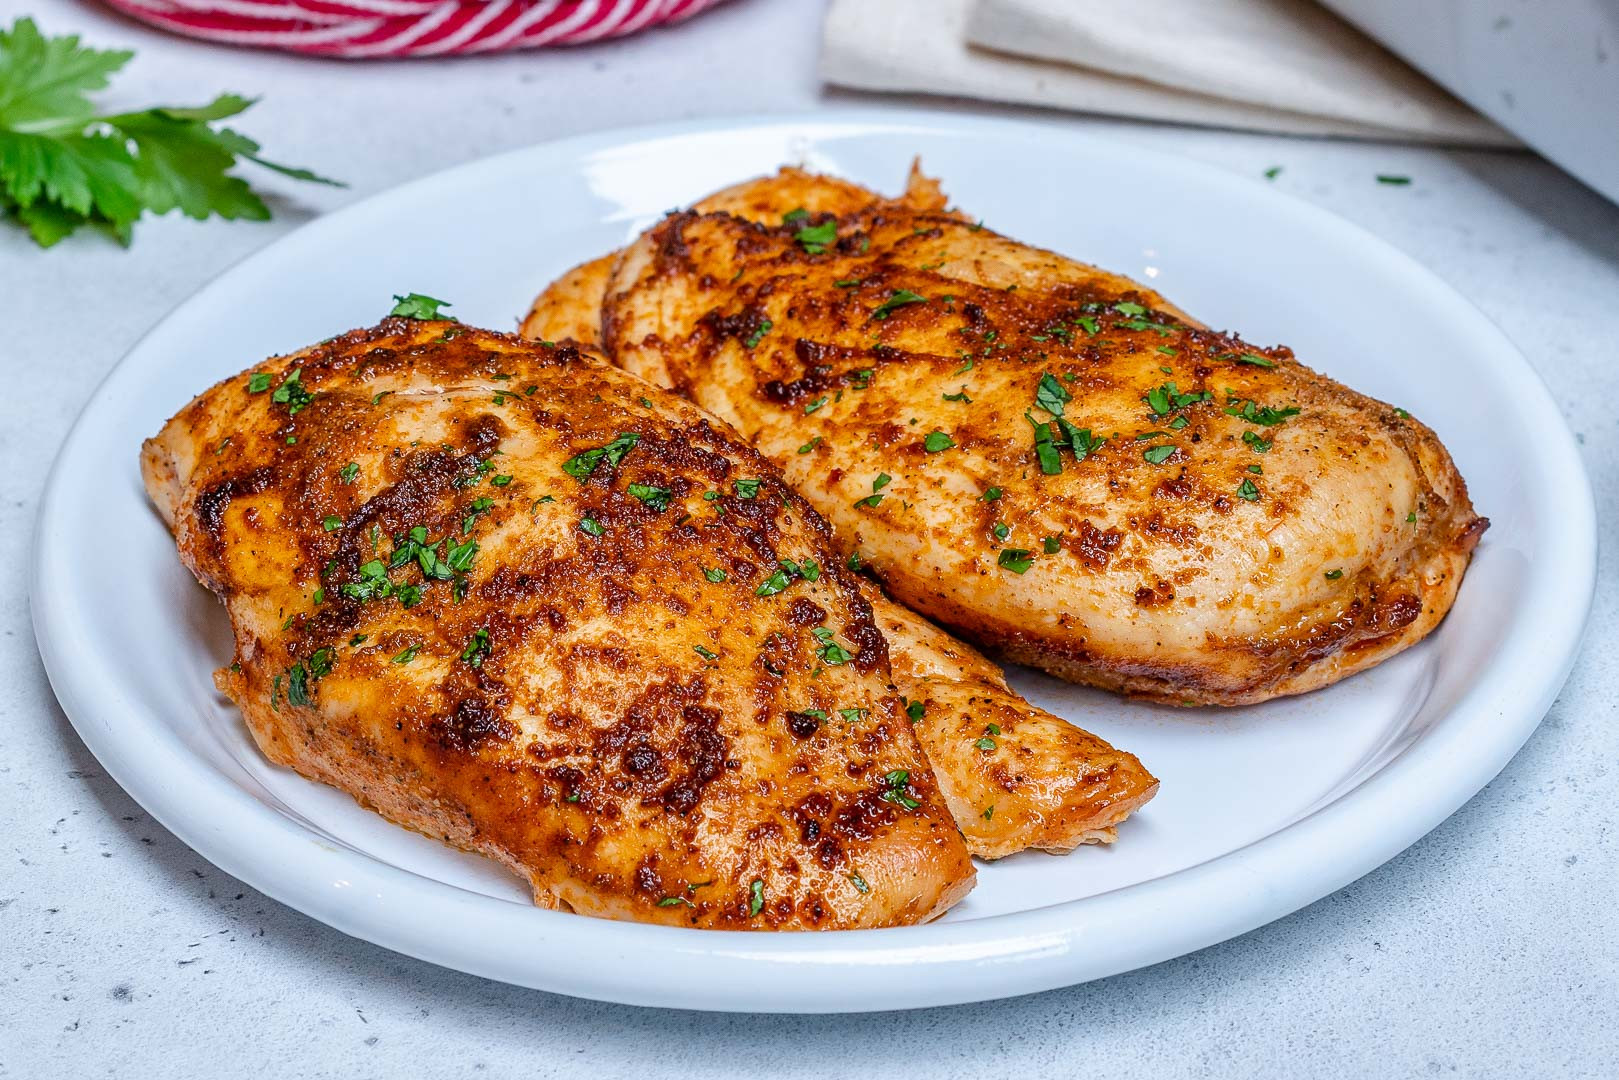 Perfect Baked Chicken Breast
 How to Make Perfect Juicy Baked Chicken Breasts Everytime